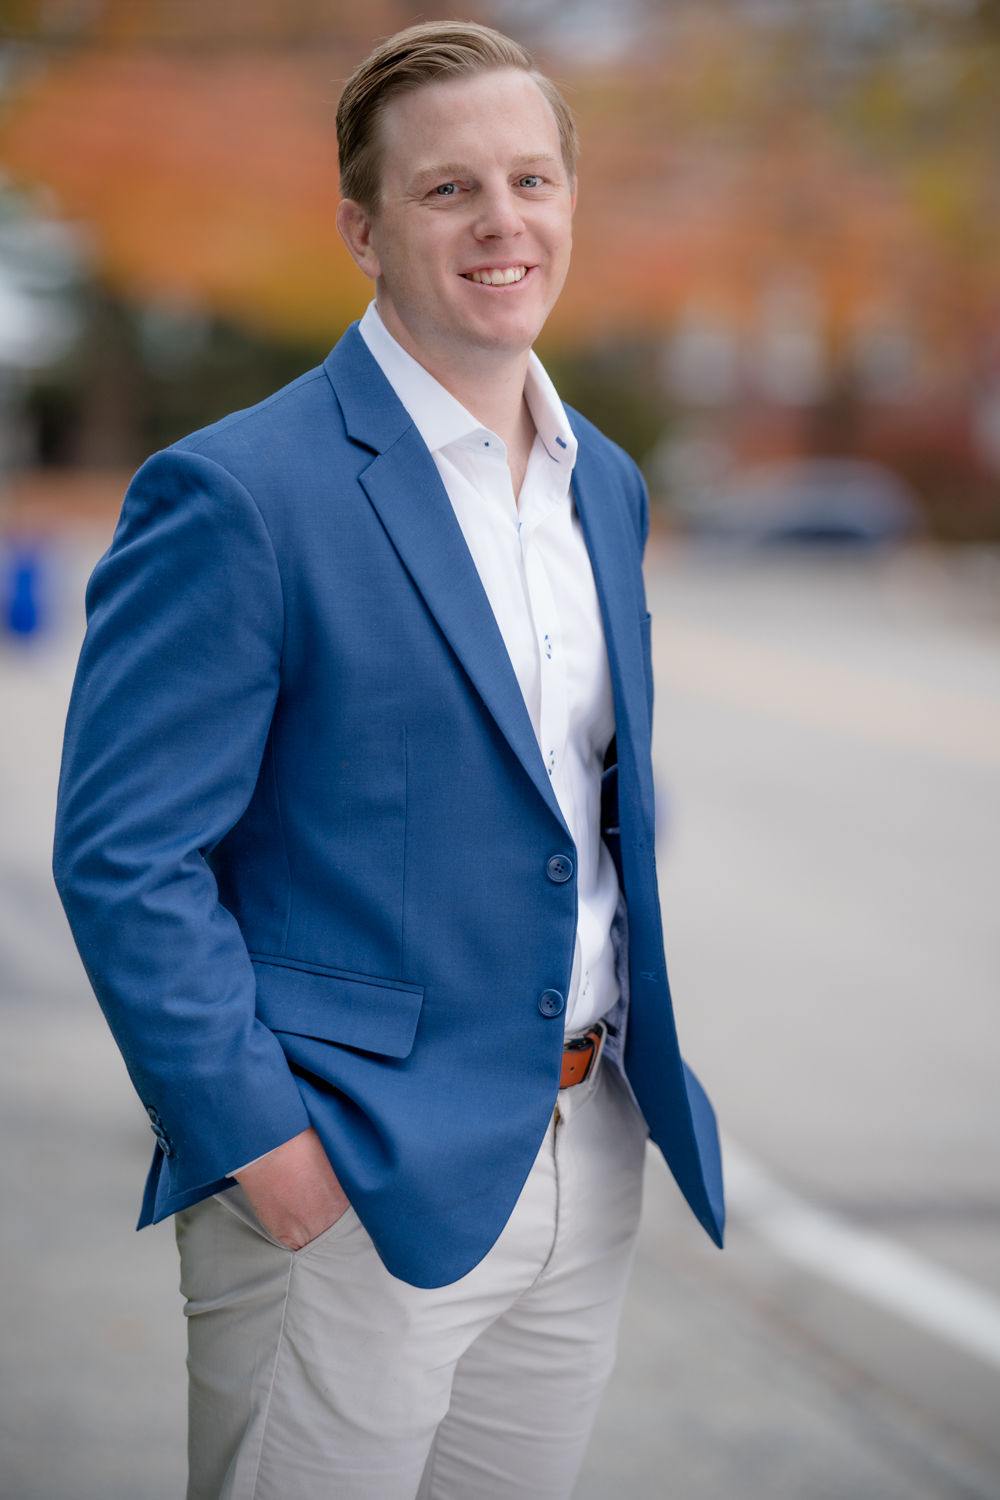 Introducing our Director of Business Development, Kyle Gaffney